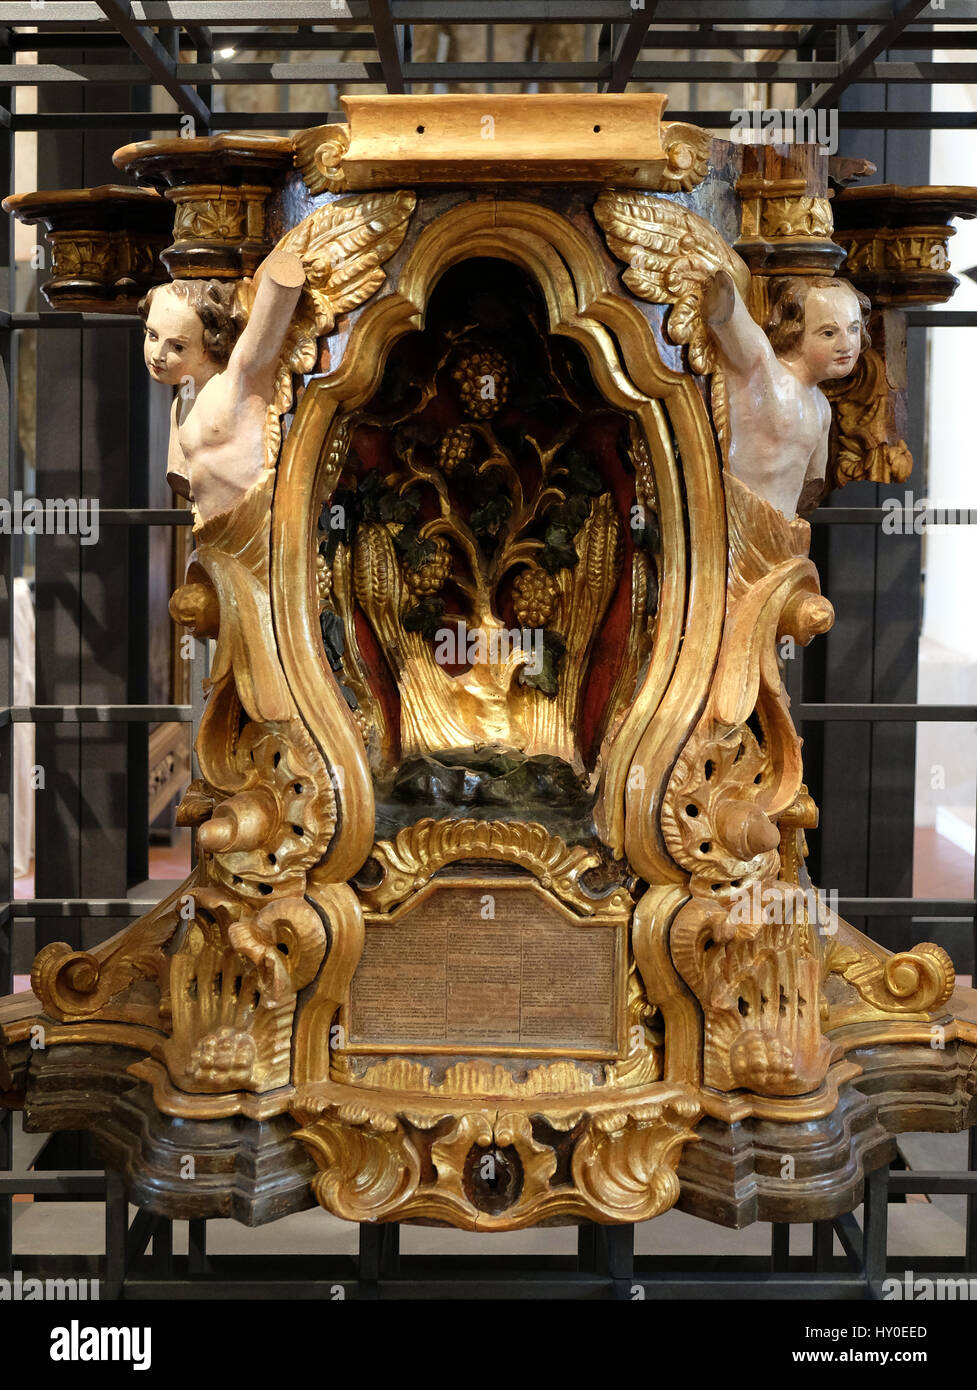 Tabernacle, main altar from the church of St. Mark, exhibited at the Museum of the City of Zagreb Stock Photo